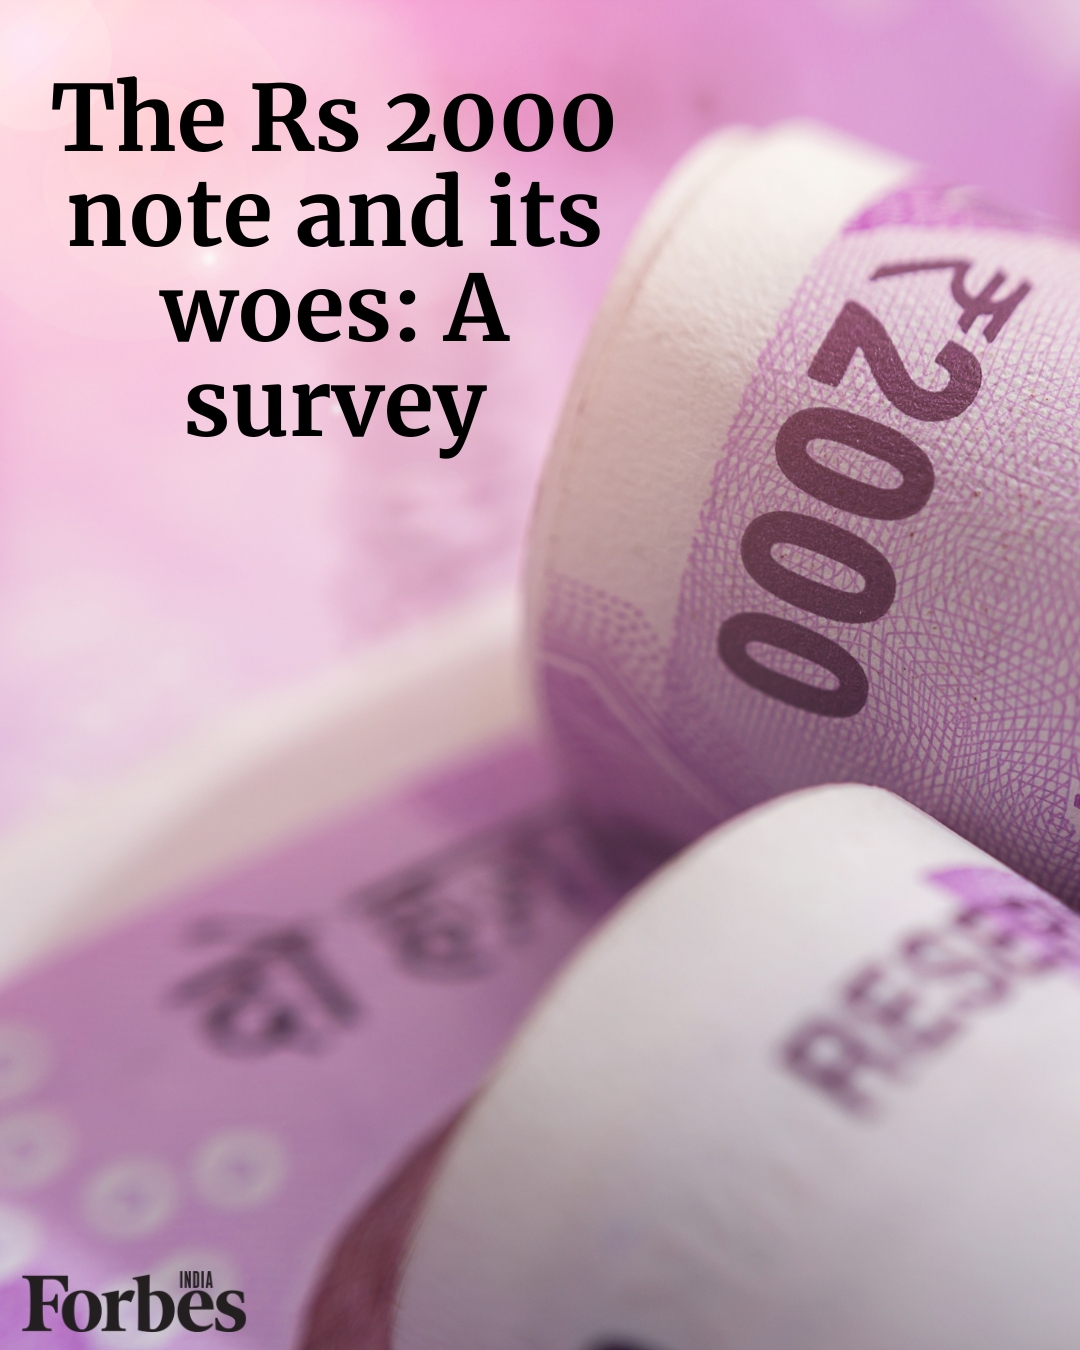 2 in 3 citizens support withdrawal of the Rs 2000 note: survey